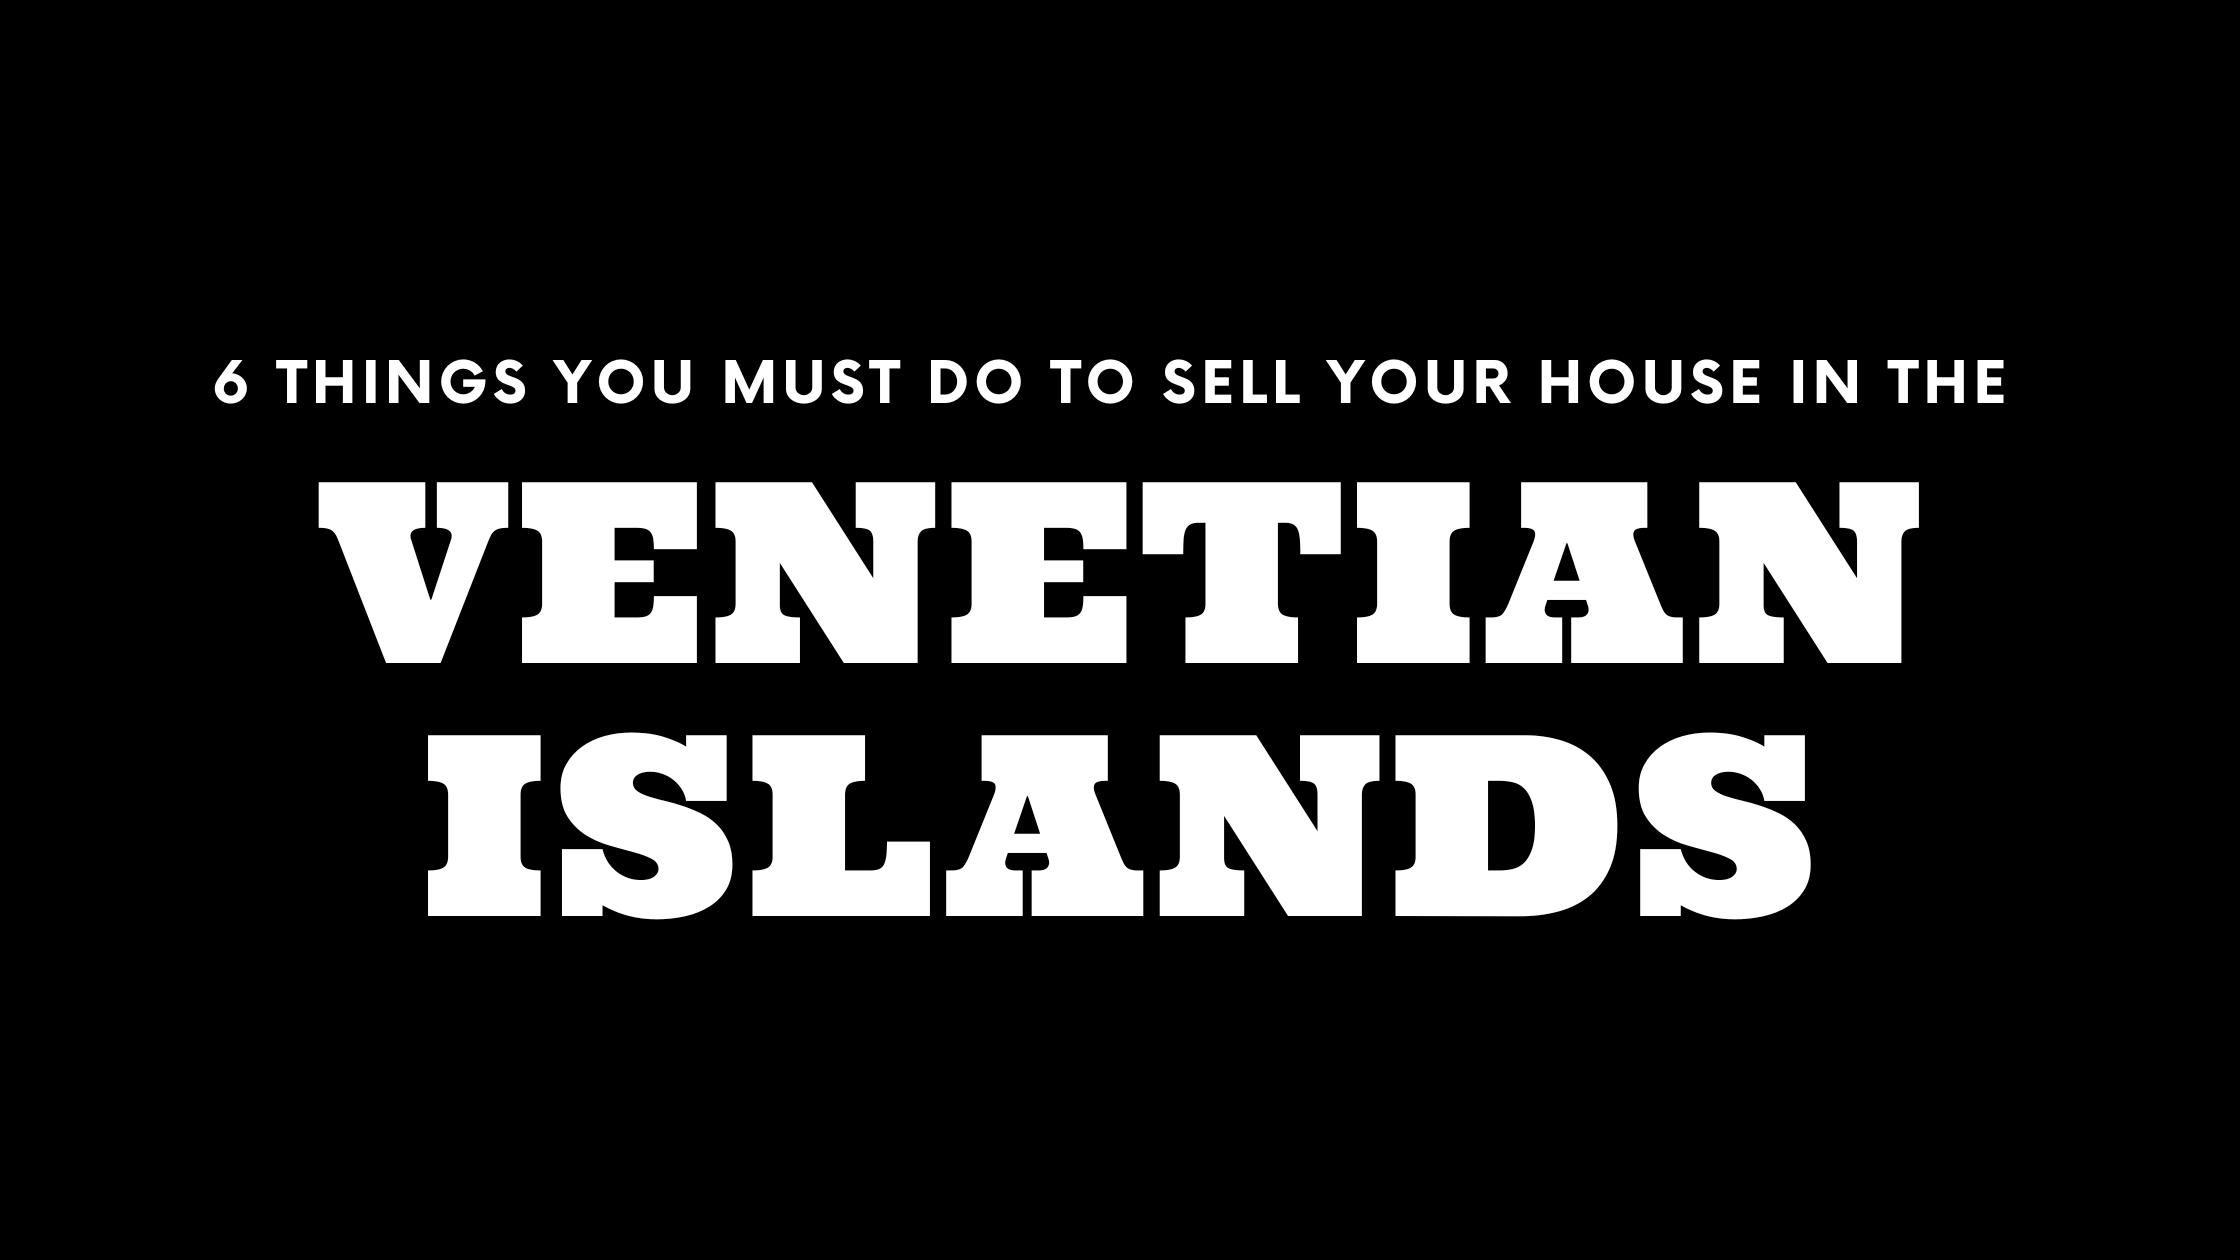 Selling Your House in the Venetian Islands? 6 Things You MUST Do!